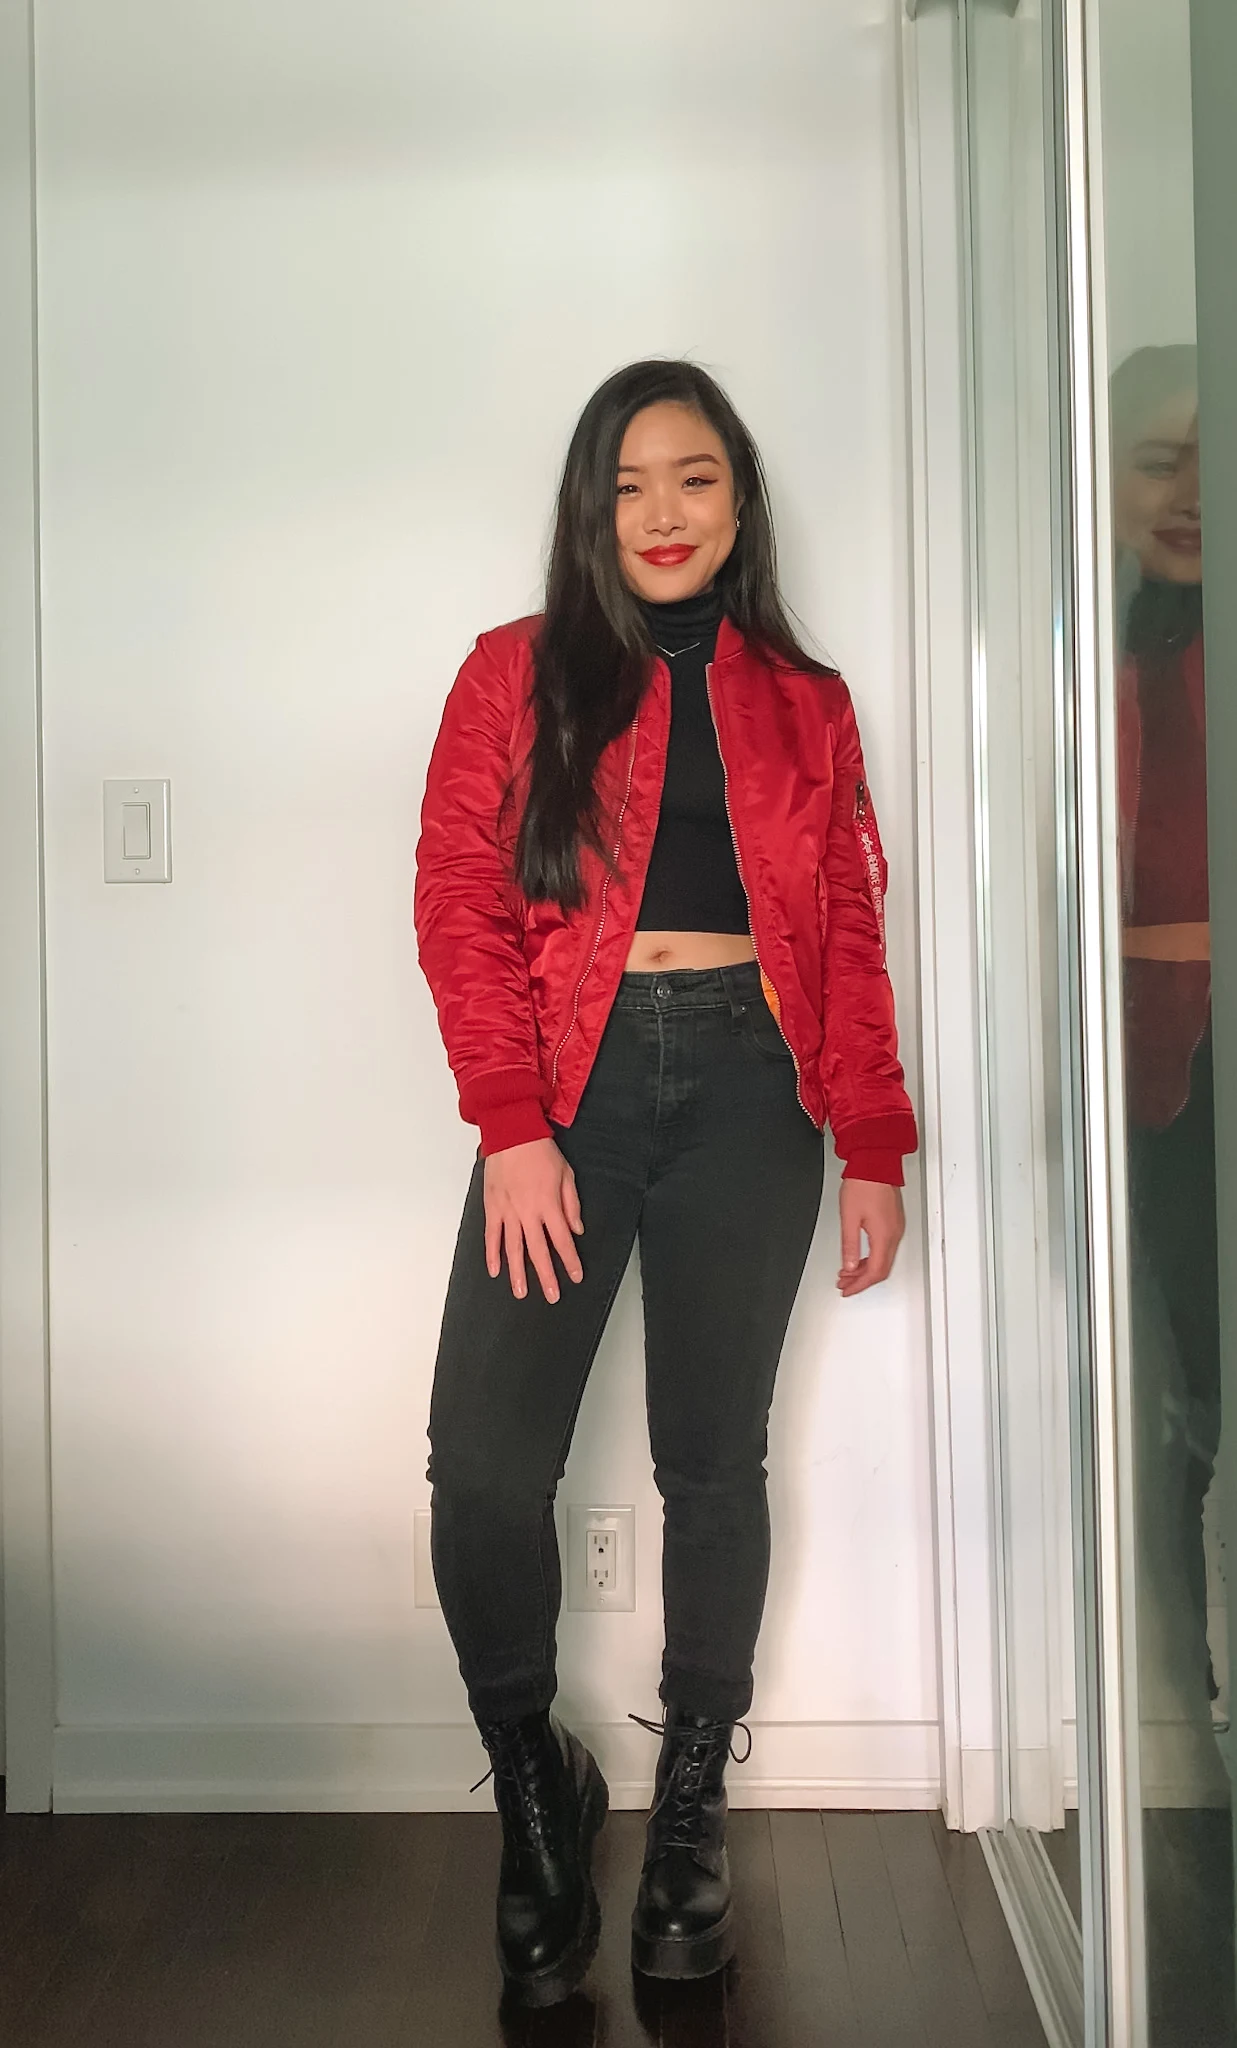 Lunar New Year & Chinese New Year outfit ideas | Alpha Industries MA-1 red bomber jacket + black cropped turtleneck + Levi's black denim + Steve Madden combat boots